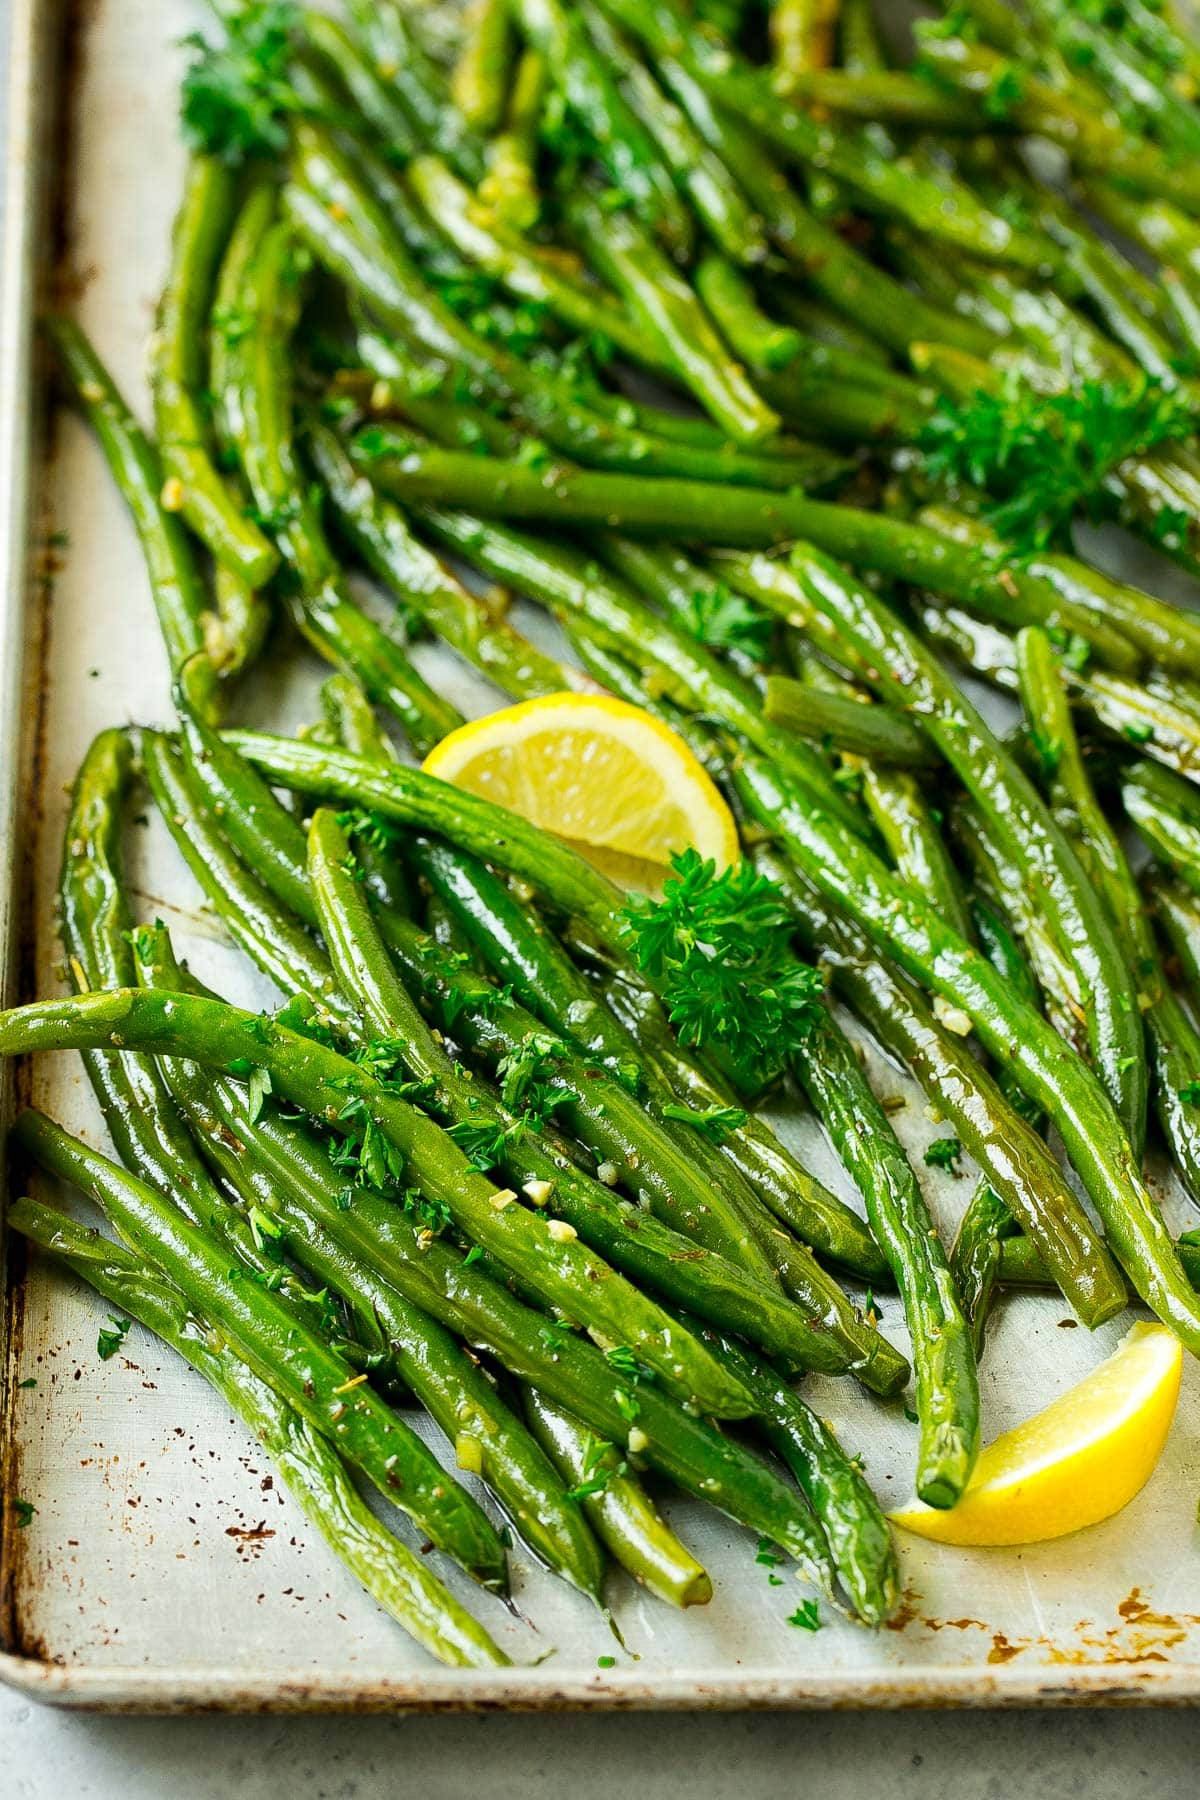 A close up of green beans and lemon wedges.